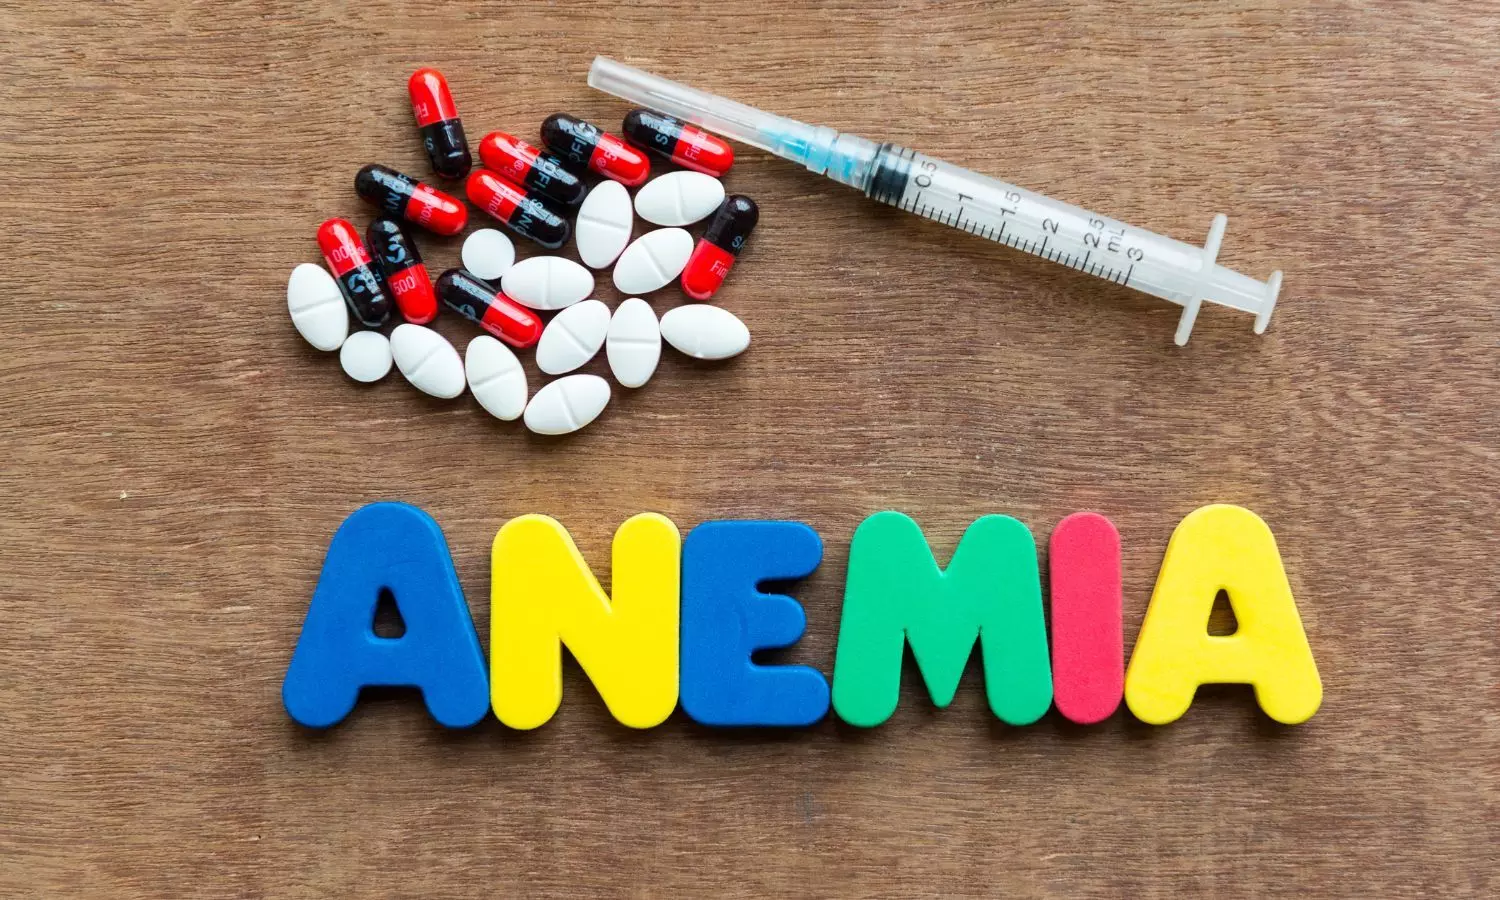 Iron deficiency anemia: Impact on womens reproductive health